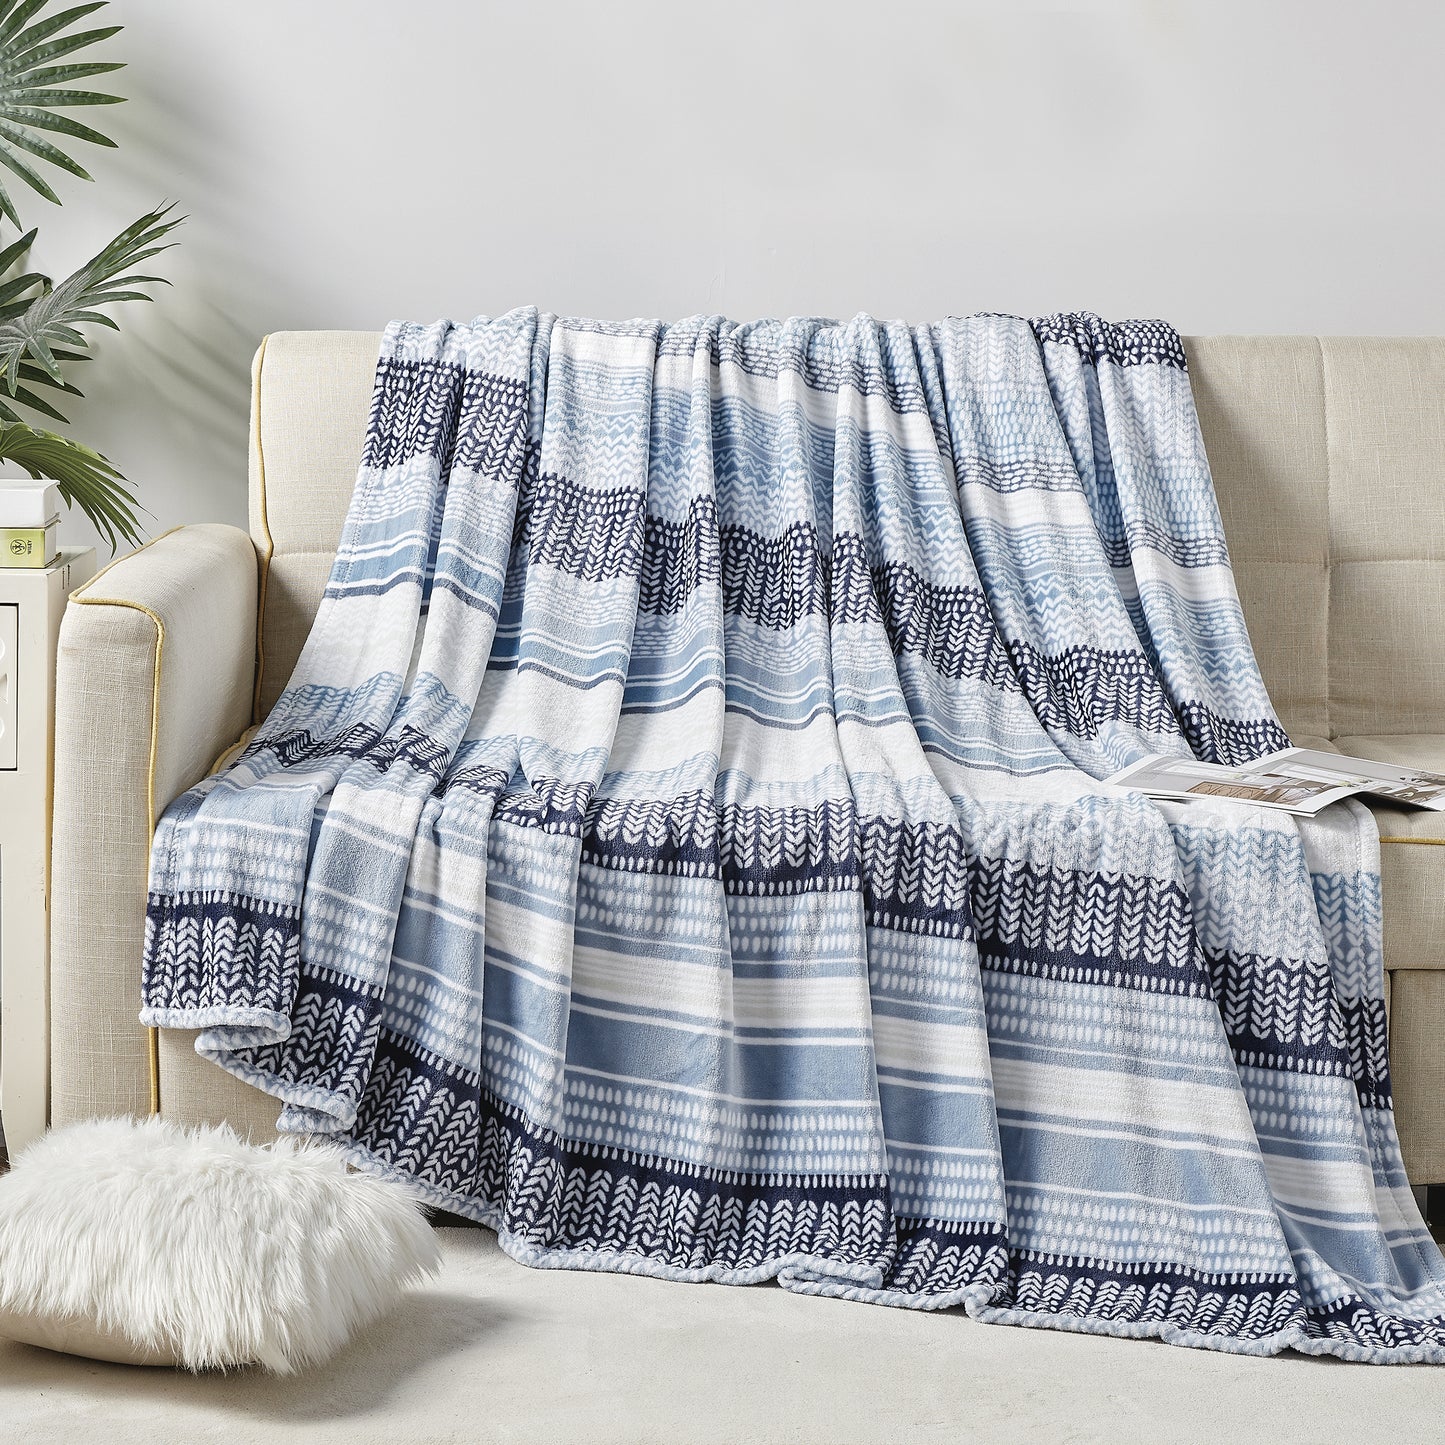 Elegant Comfort Printed Bed or Oversized Couch Blanket - Lightweight for All Season Warmth